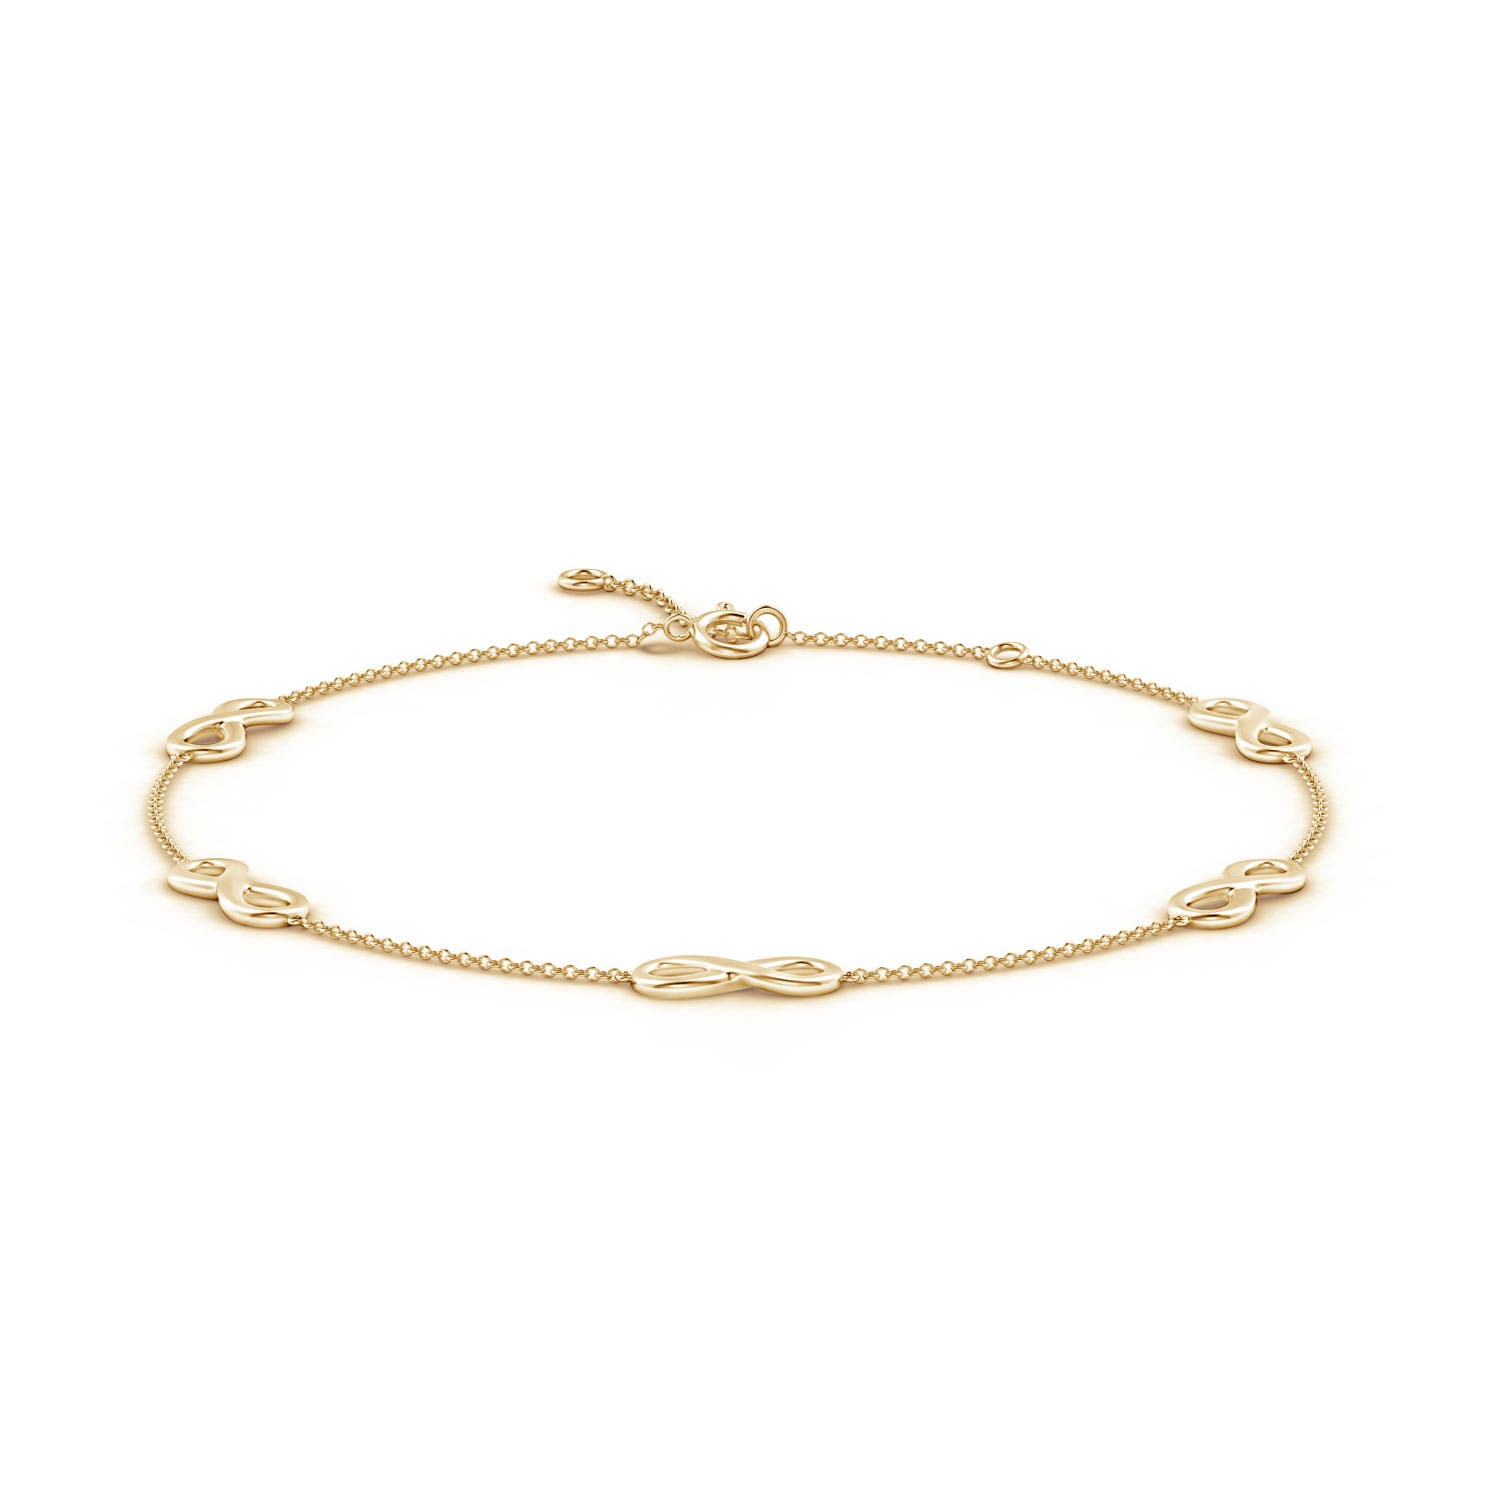 Women Dainty Anklet 18K Rose Gold Foot Chain Adjustable Ankle Bracelet  Perfect Birthday Christmas : Amazon.co.uk: Fashion